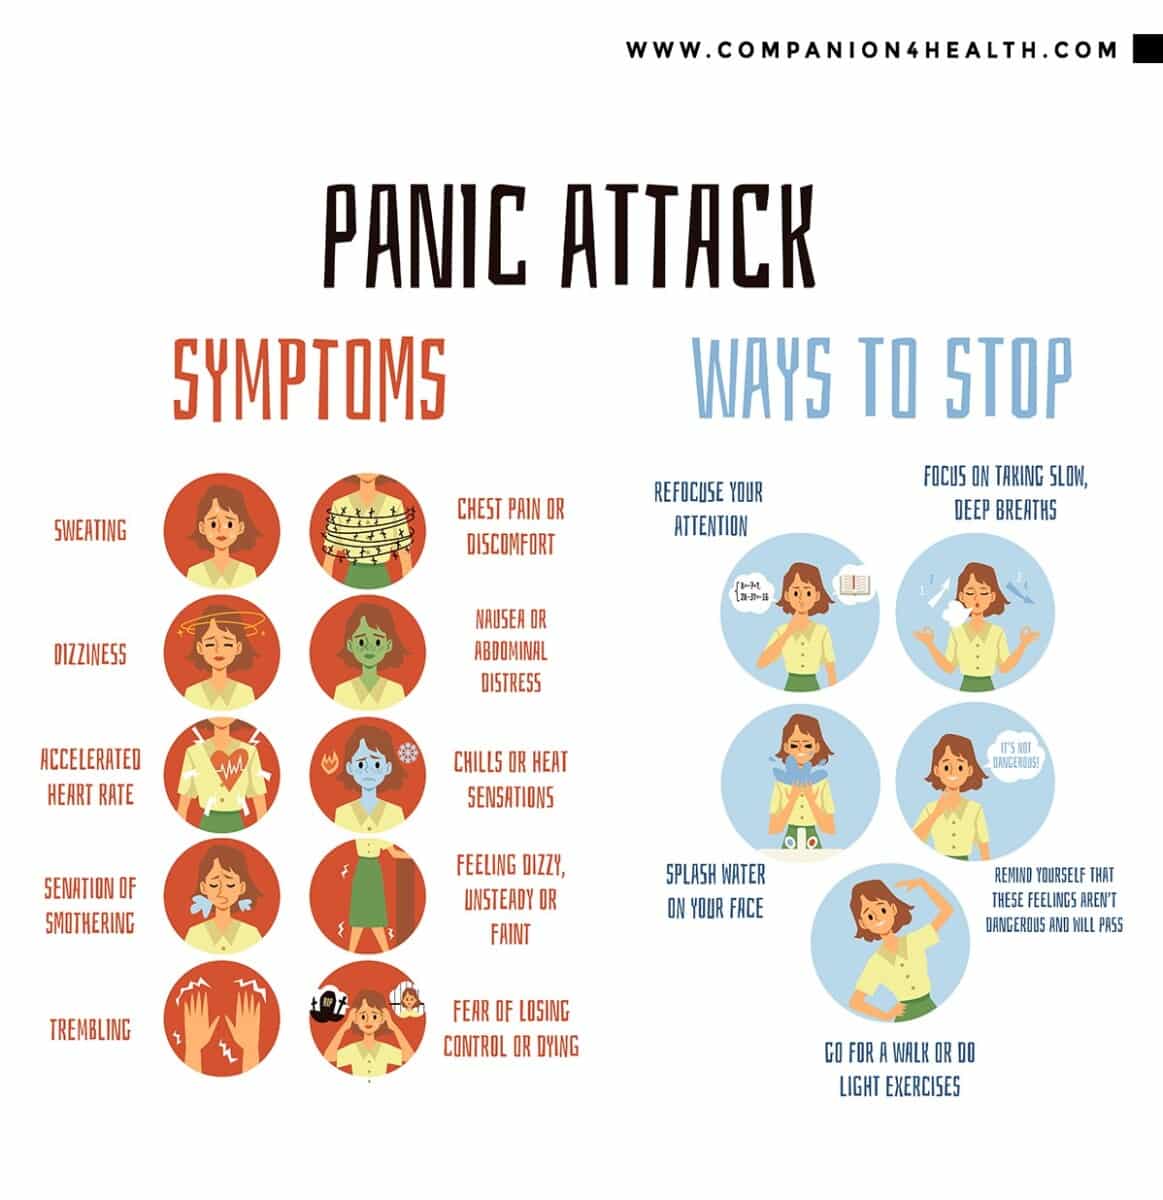 What Does a Panic Attack Feel Like and Is It Treatable?